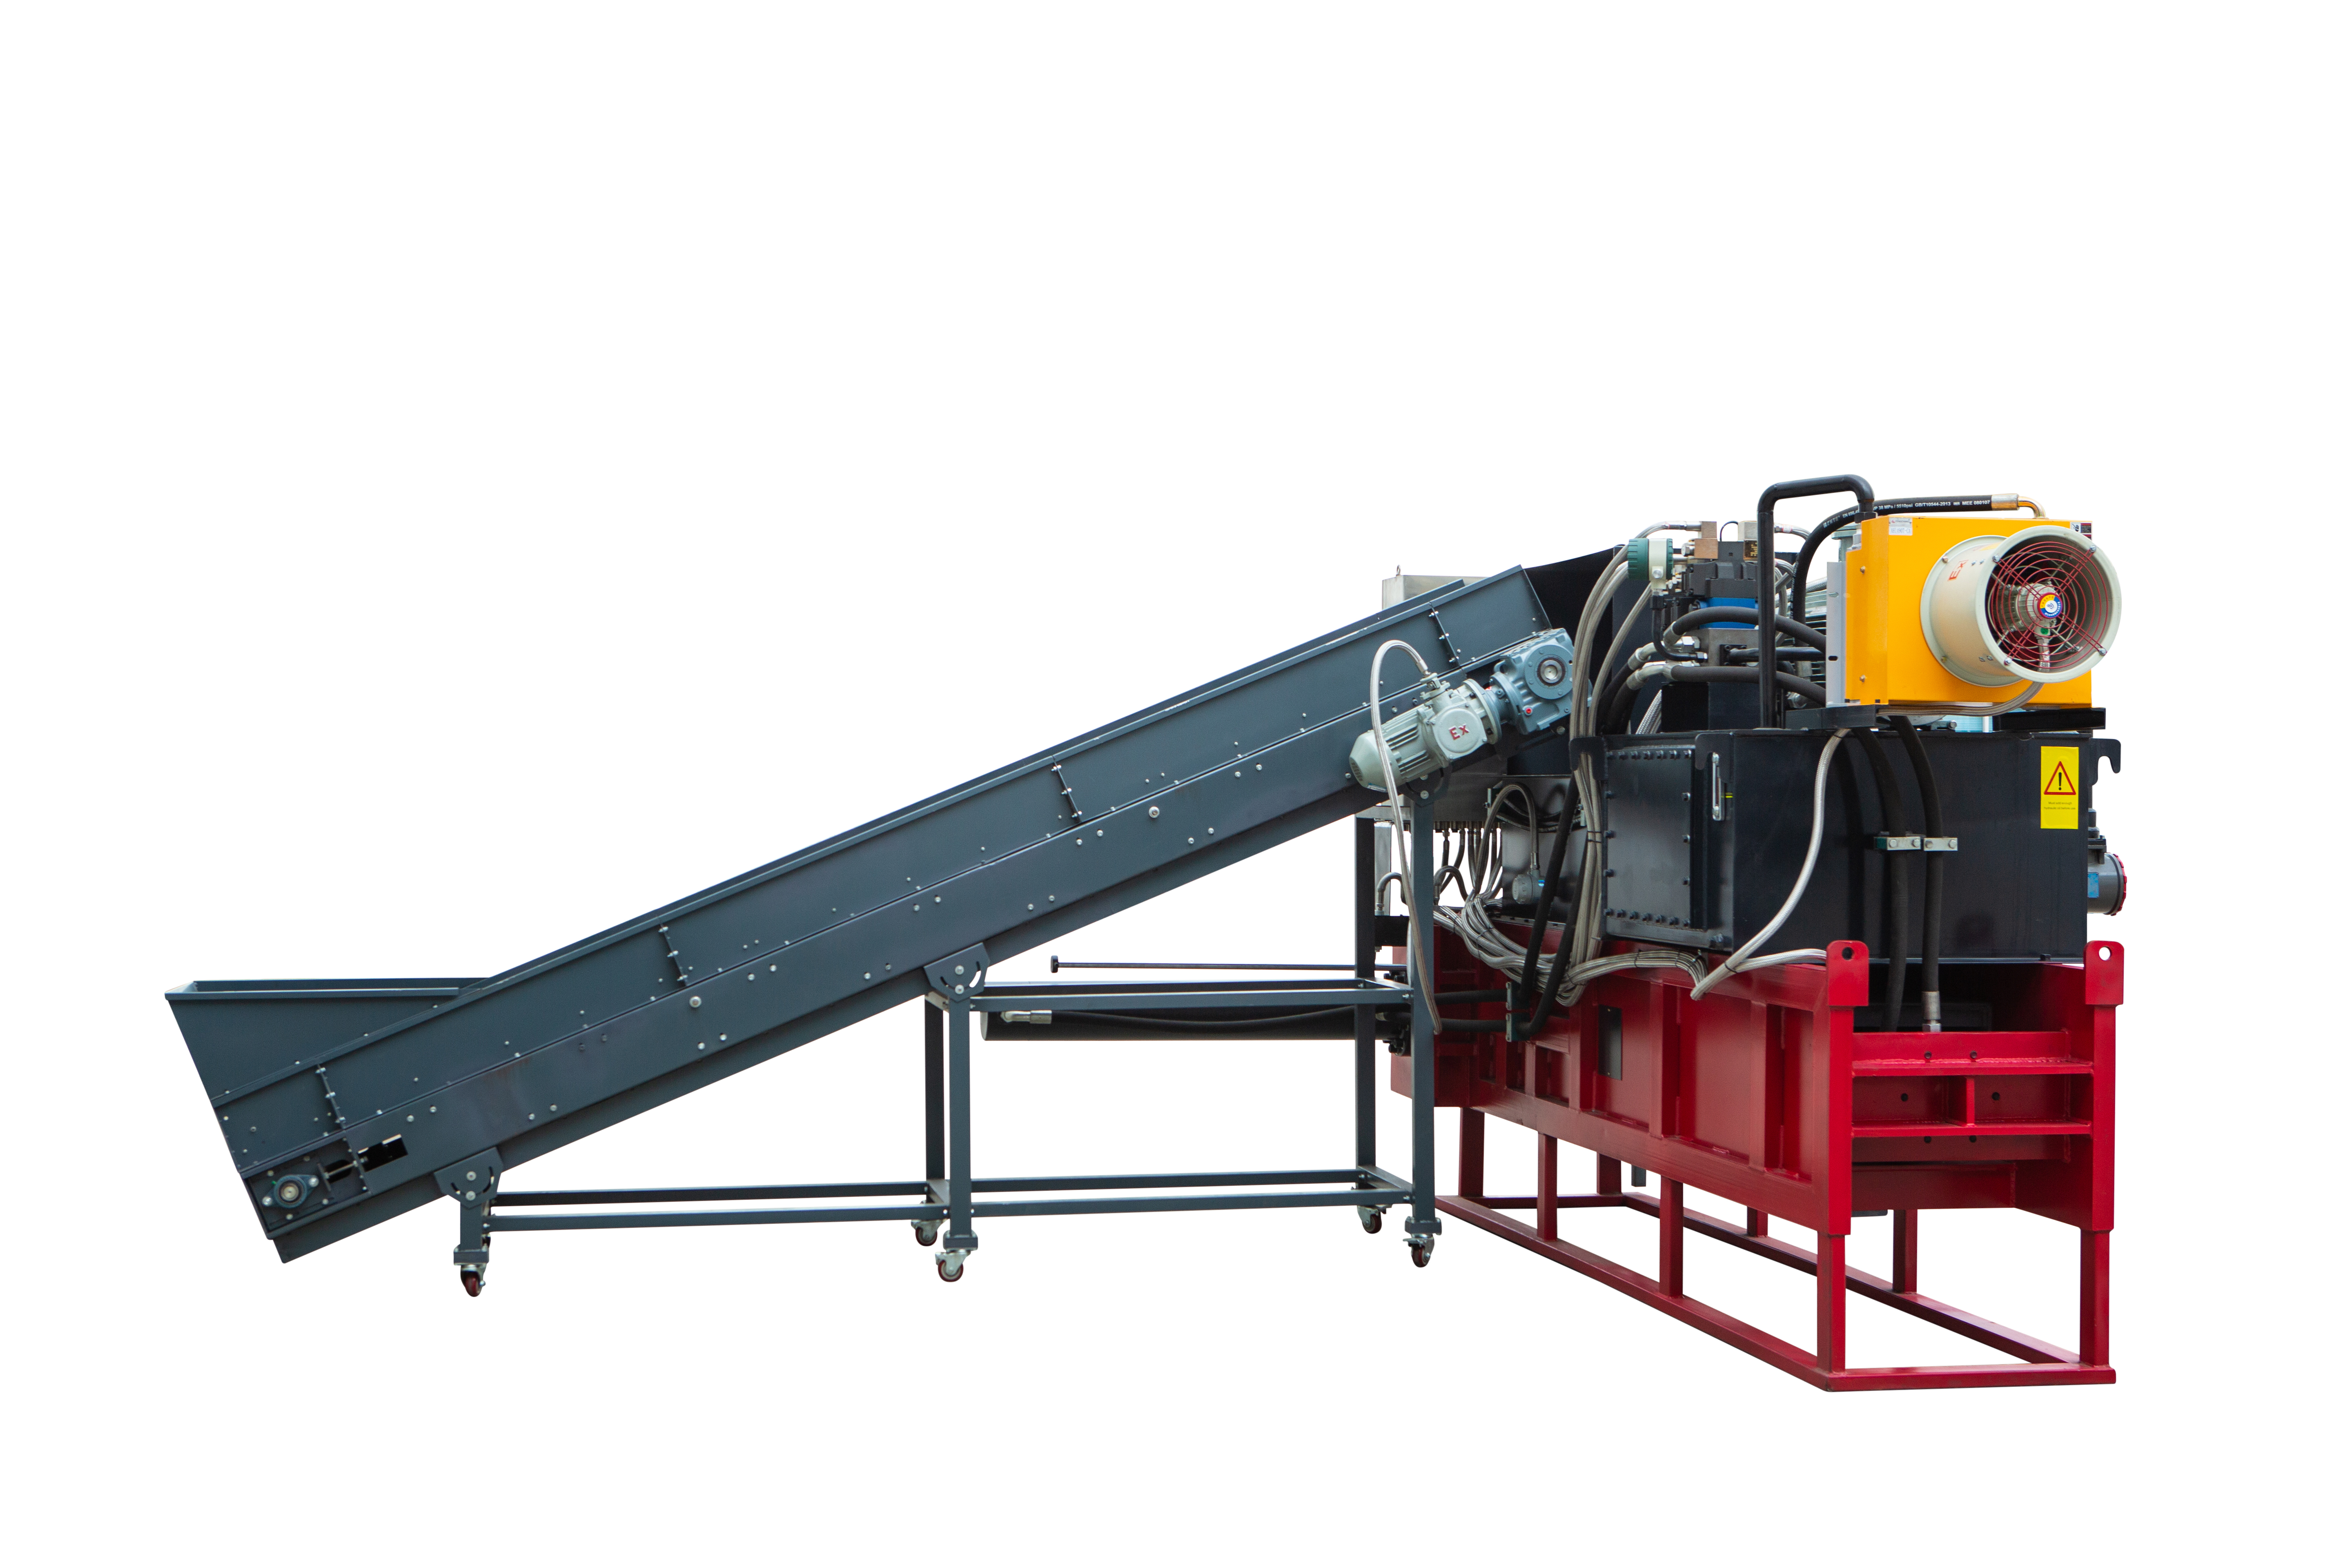 ENERPAT HBA-B90 Wood Shaving Bagging Baler on the Way to Chile,used for wood shaving